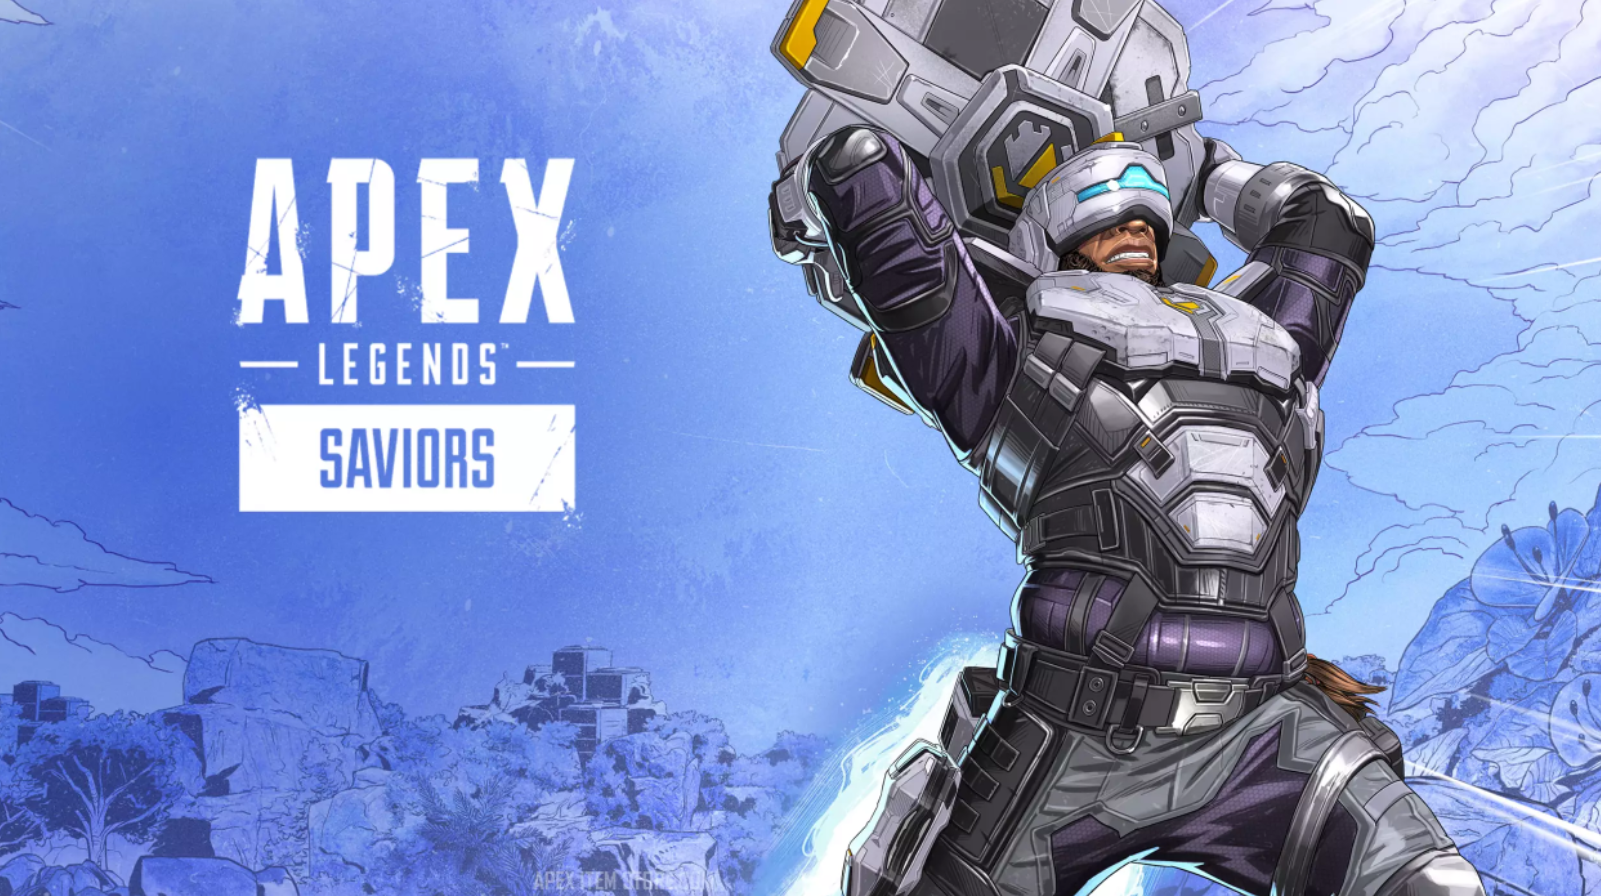 Apex Legends' newest season 'Saviors' is almost here!